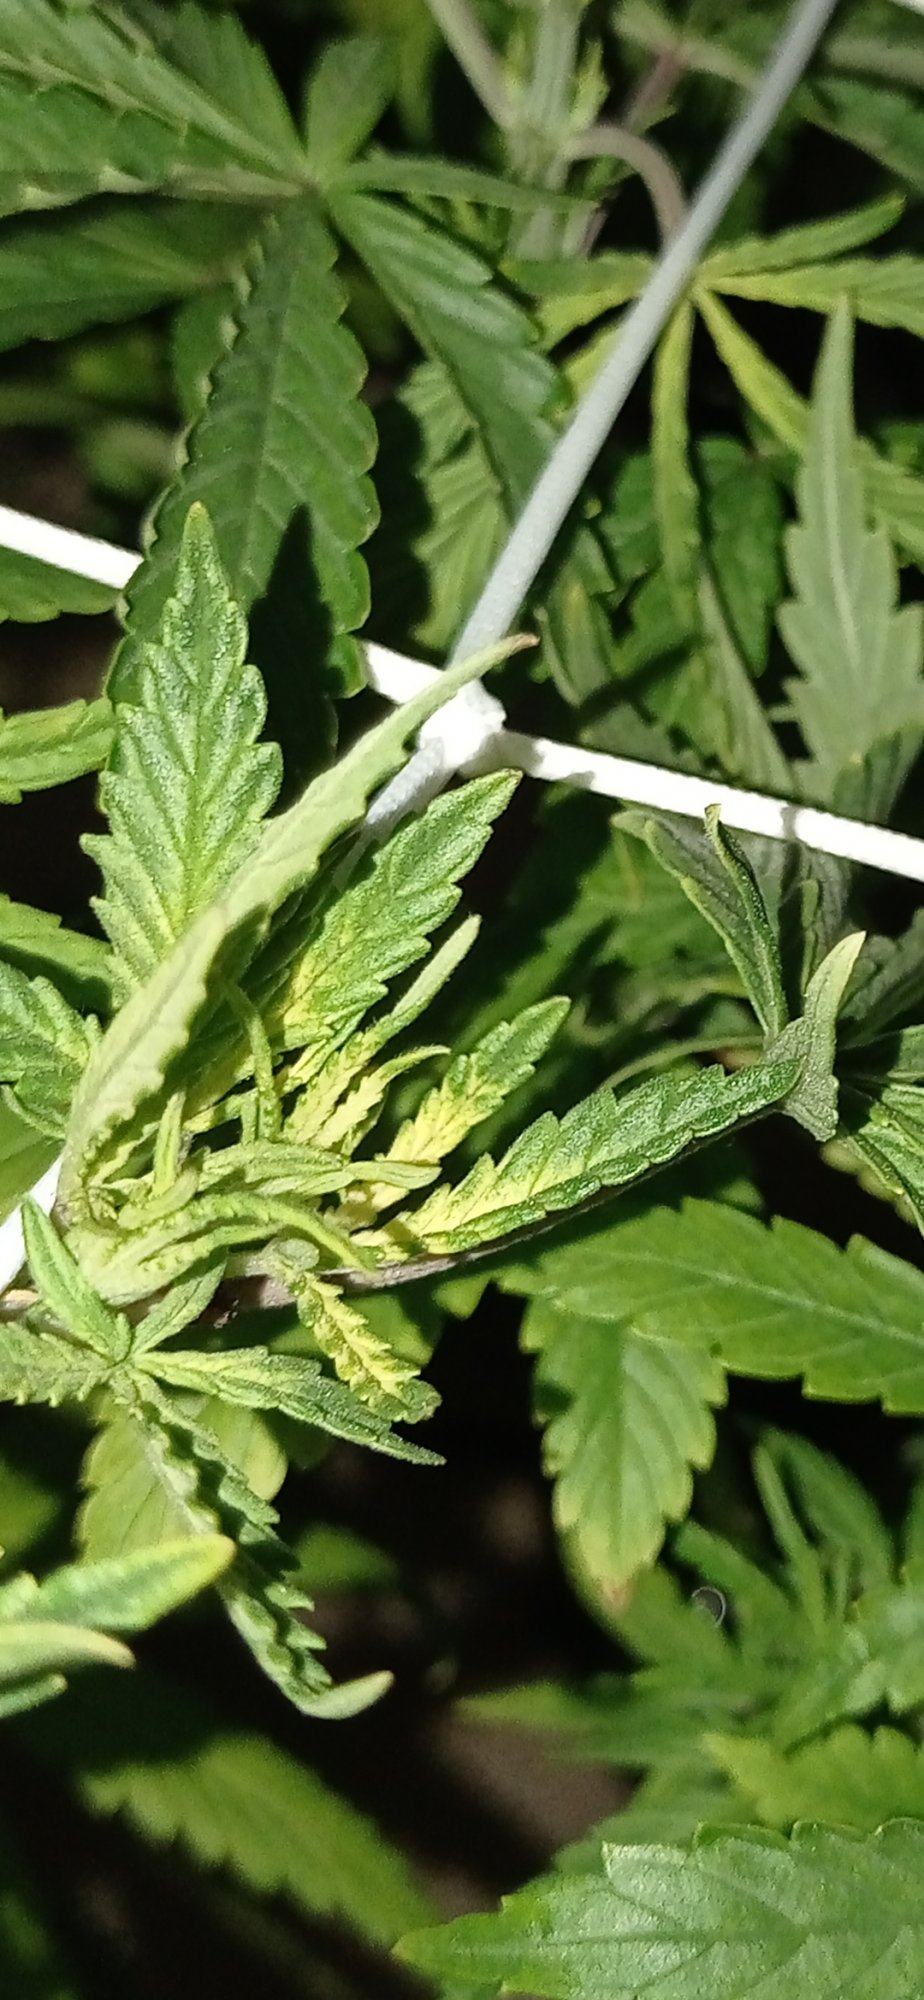 What is wrong with my plants